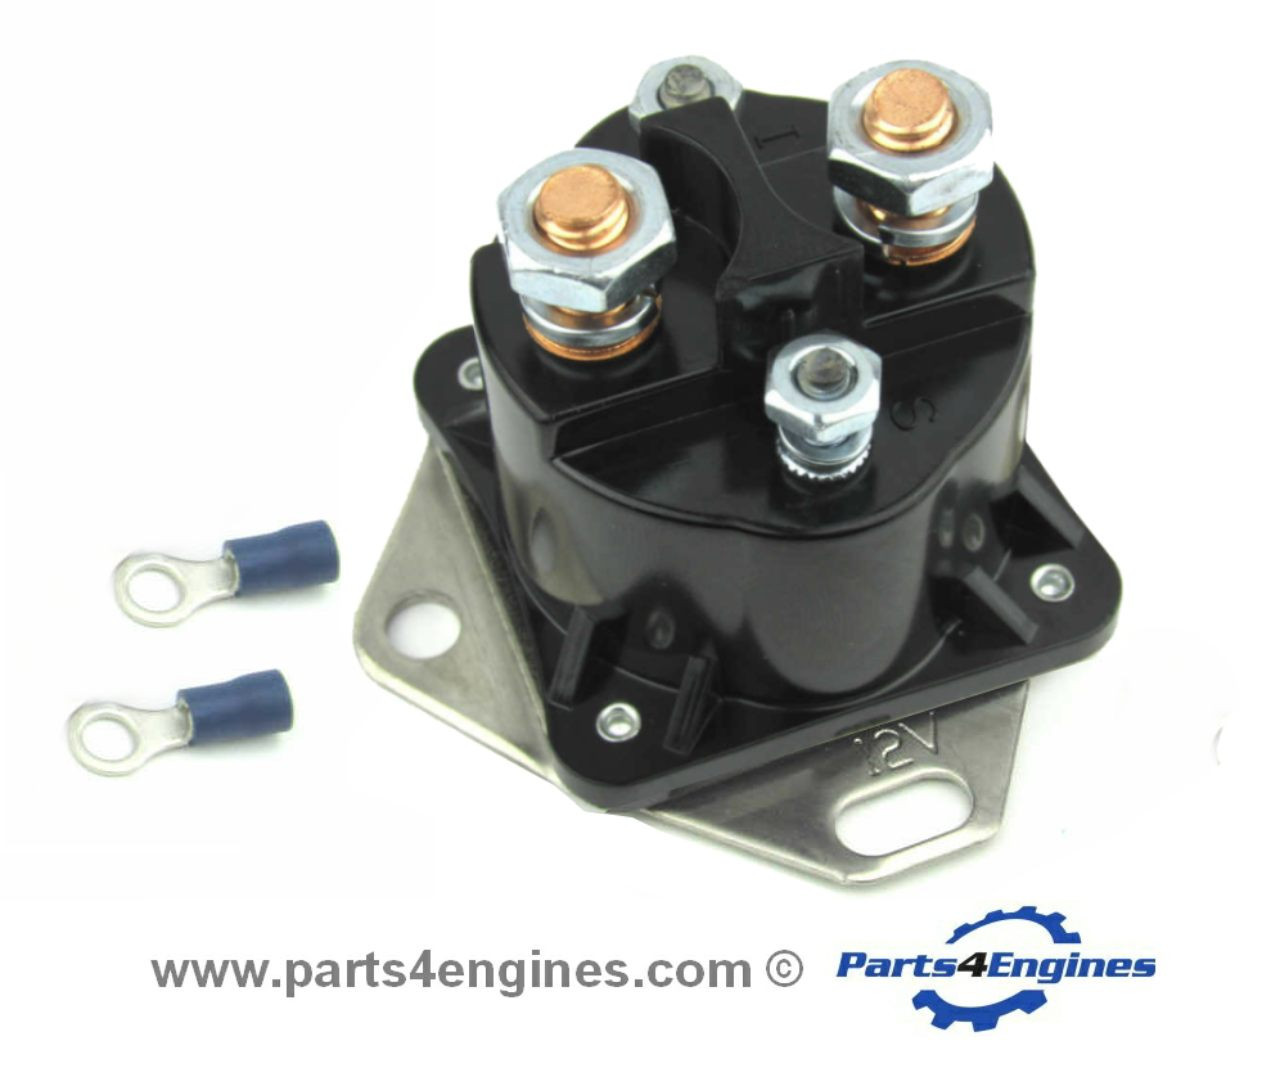 Perkins 4.107 Starter Solenoid 100 Amp from parts4engines.com